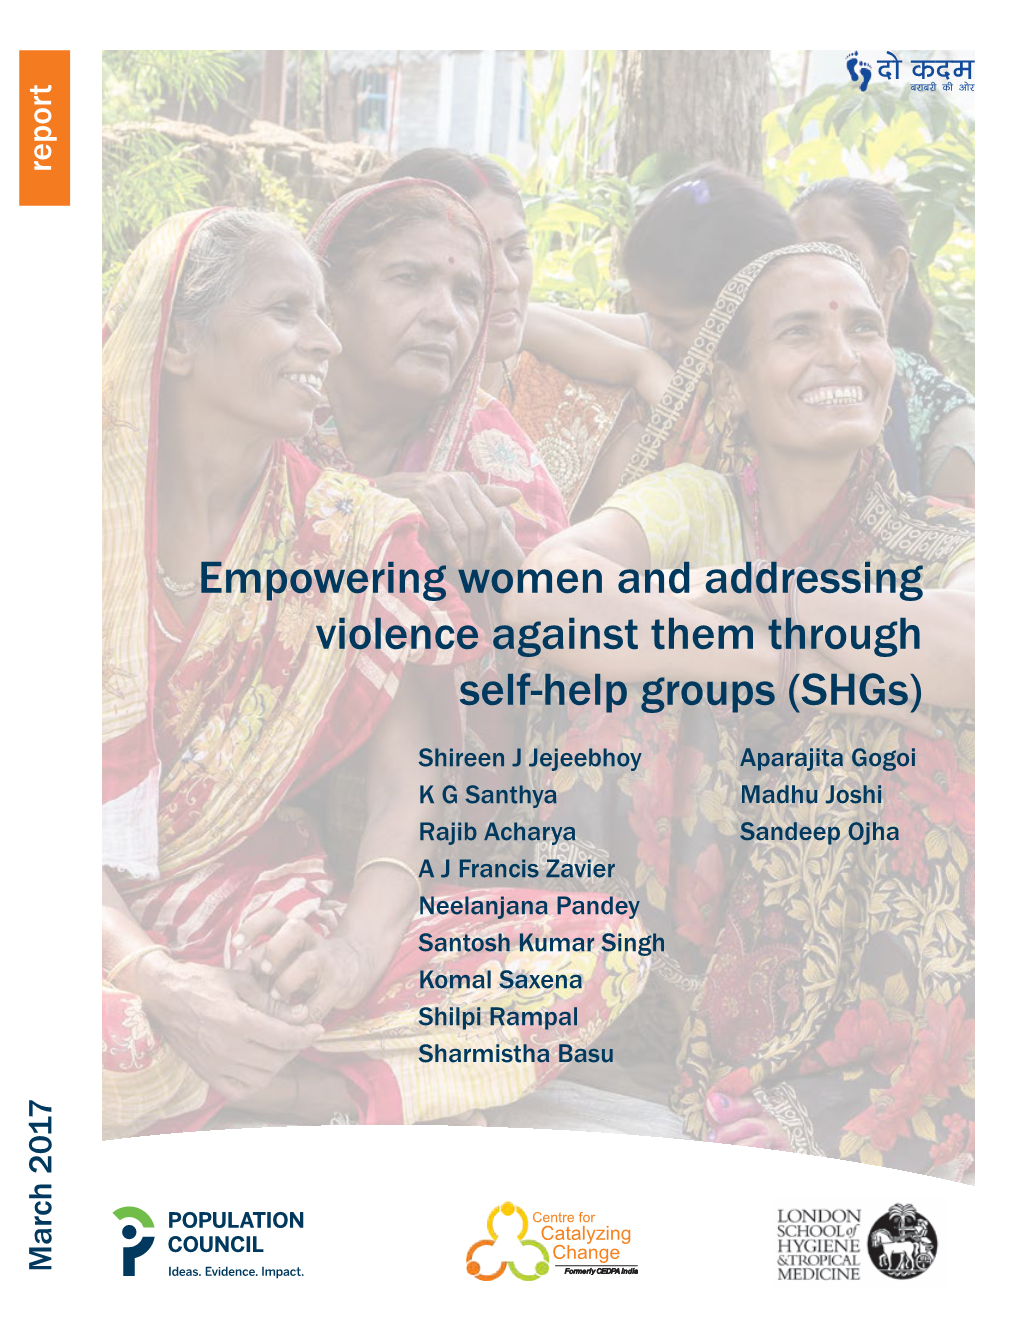 Empowering Women and Addressing Violence Against Them Through Self-Help Groups (Shgs)